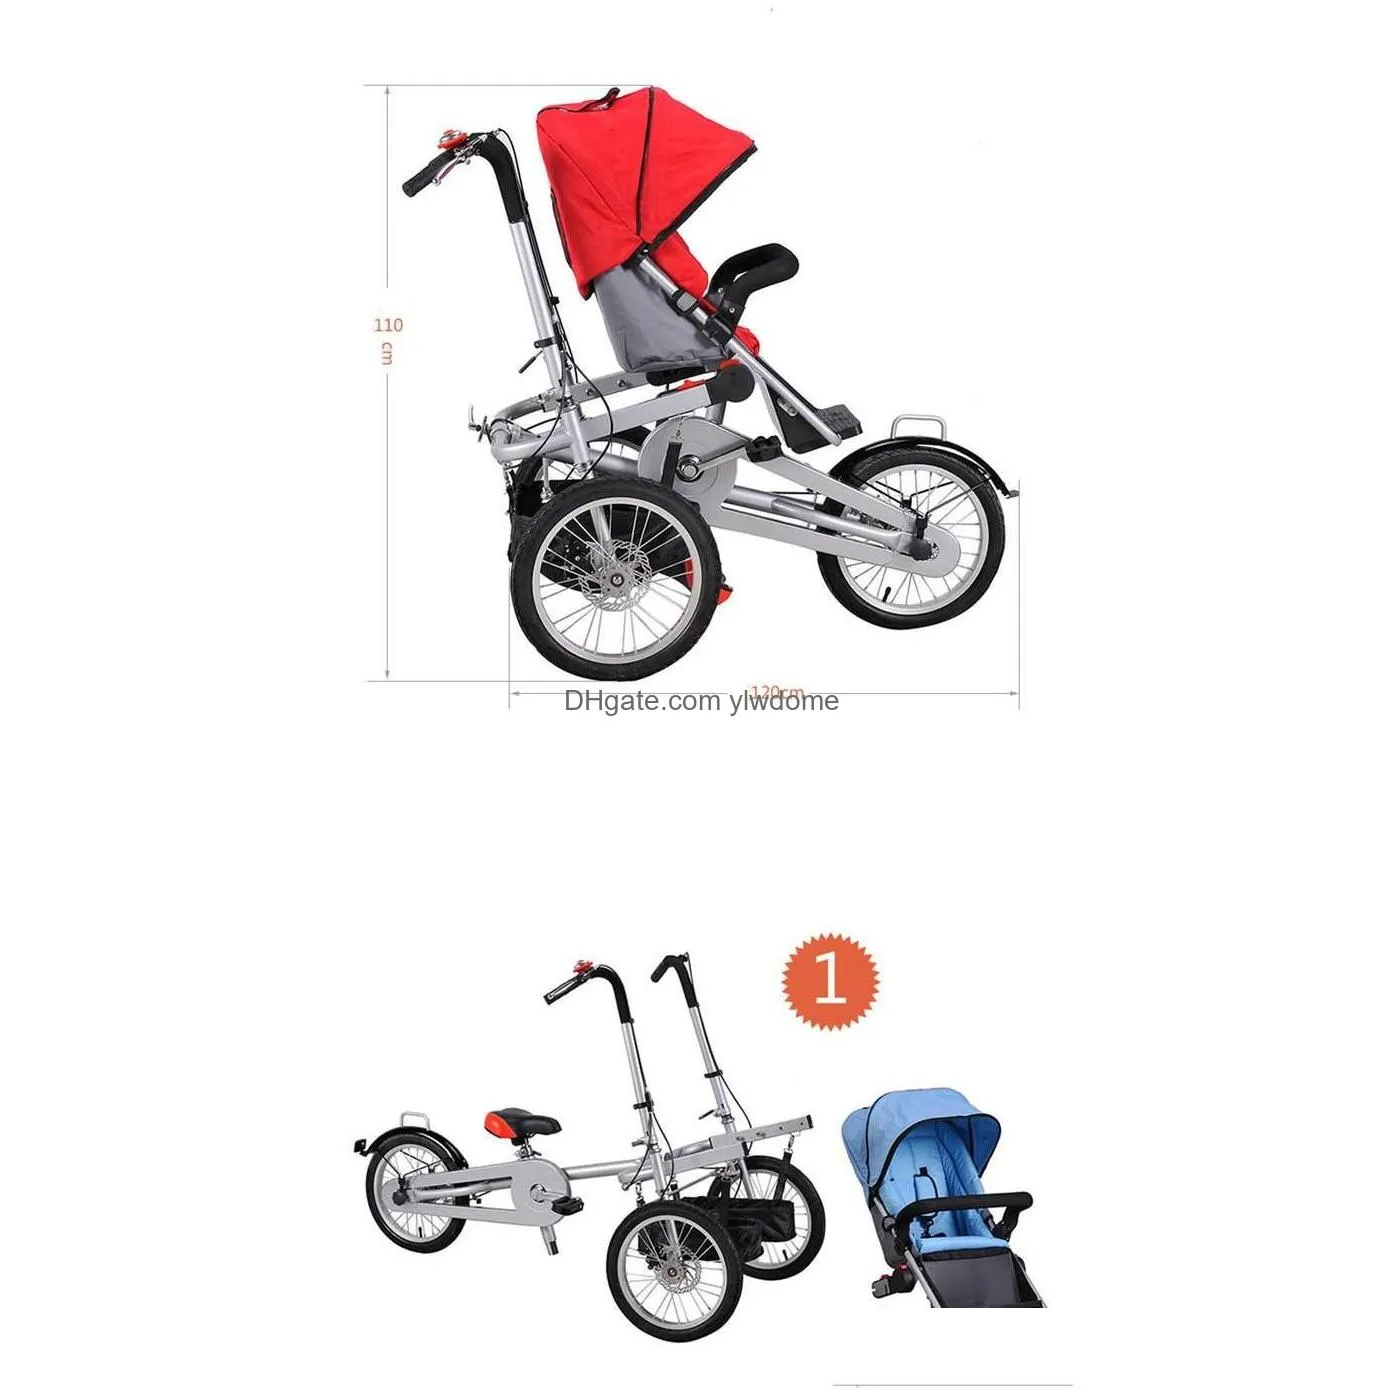 Strollers# Strollers Parentchild Tricycle Baby Carriage Carrier Stroller Versatile Folding Mother And Child Children Bicycle Drop Deli Dhtk8